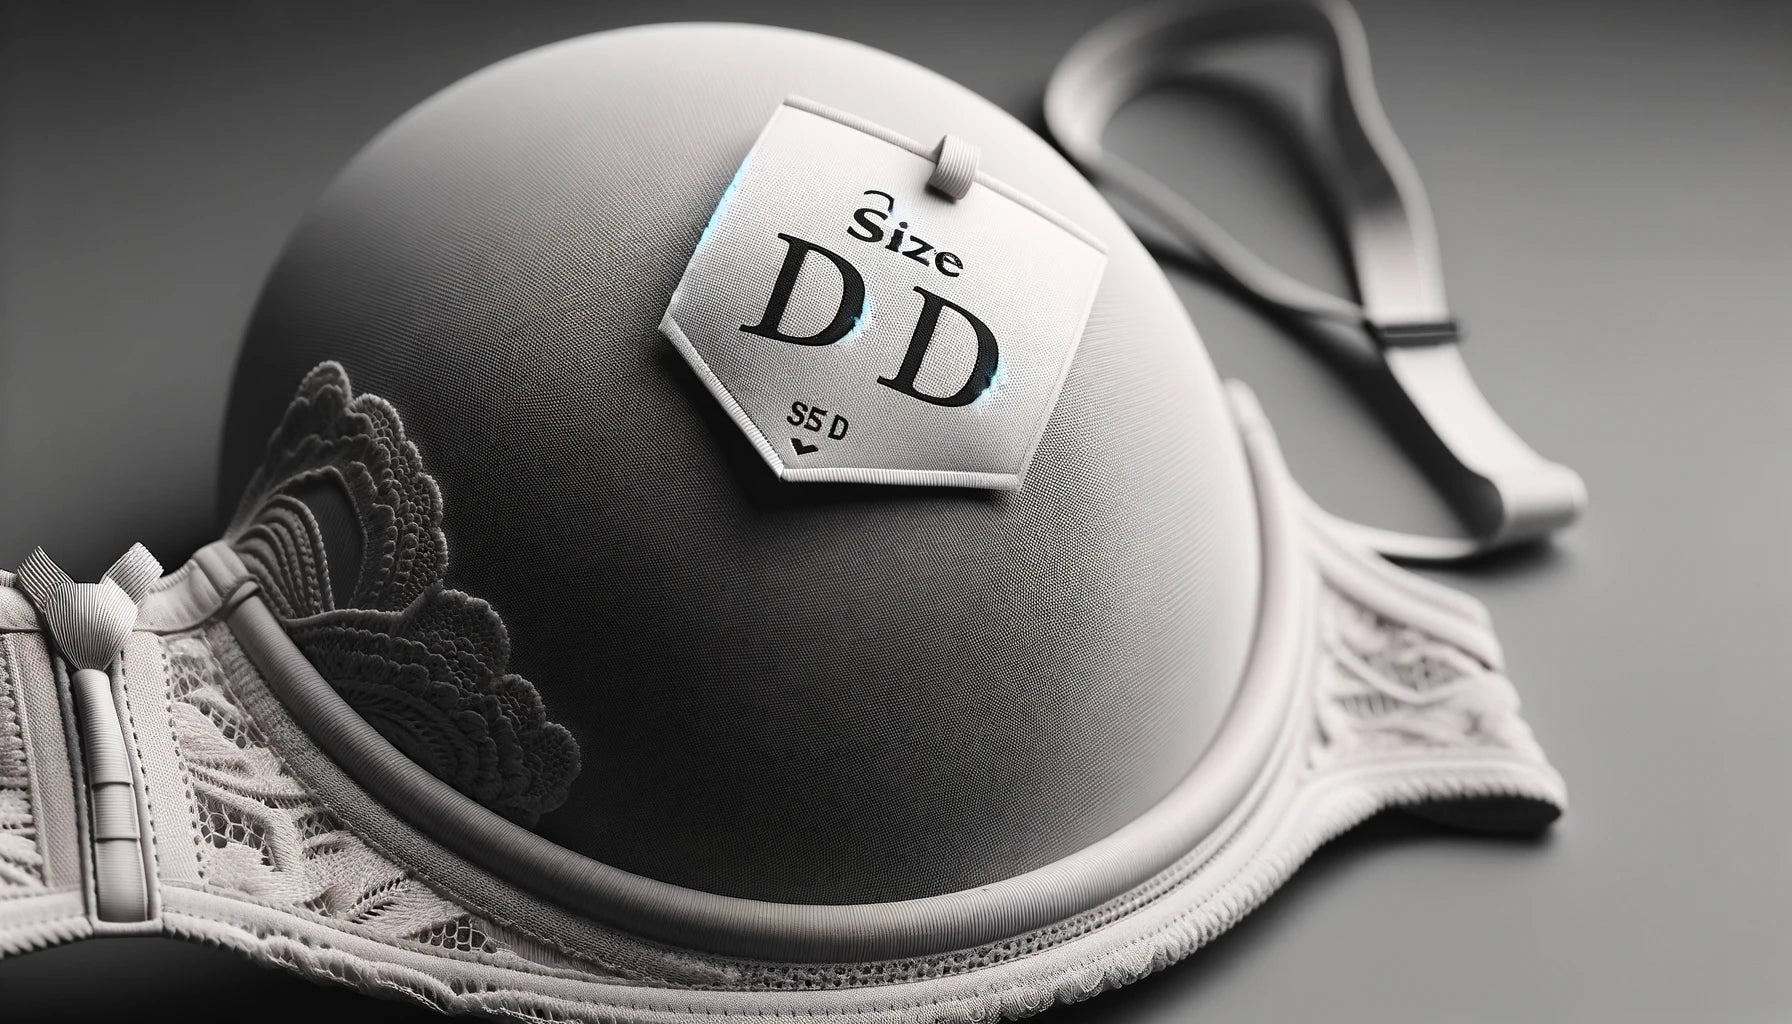 Demystify DD: Why Are We Obsessed with this Bra Size?